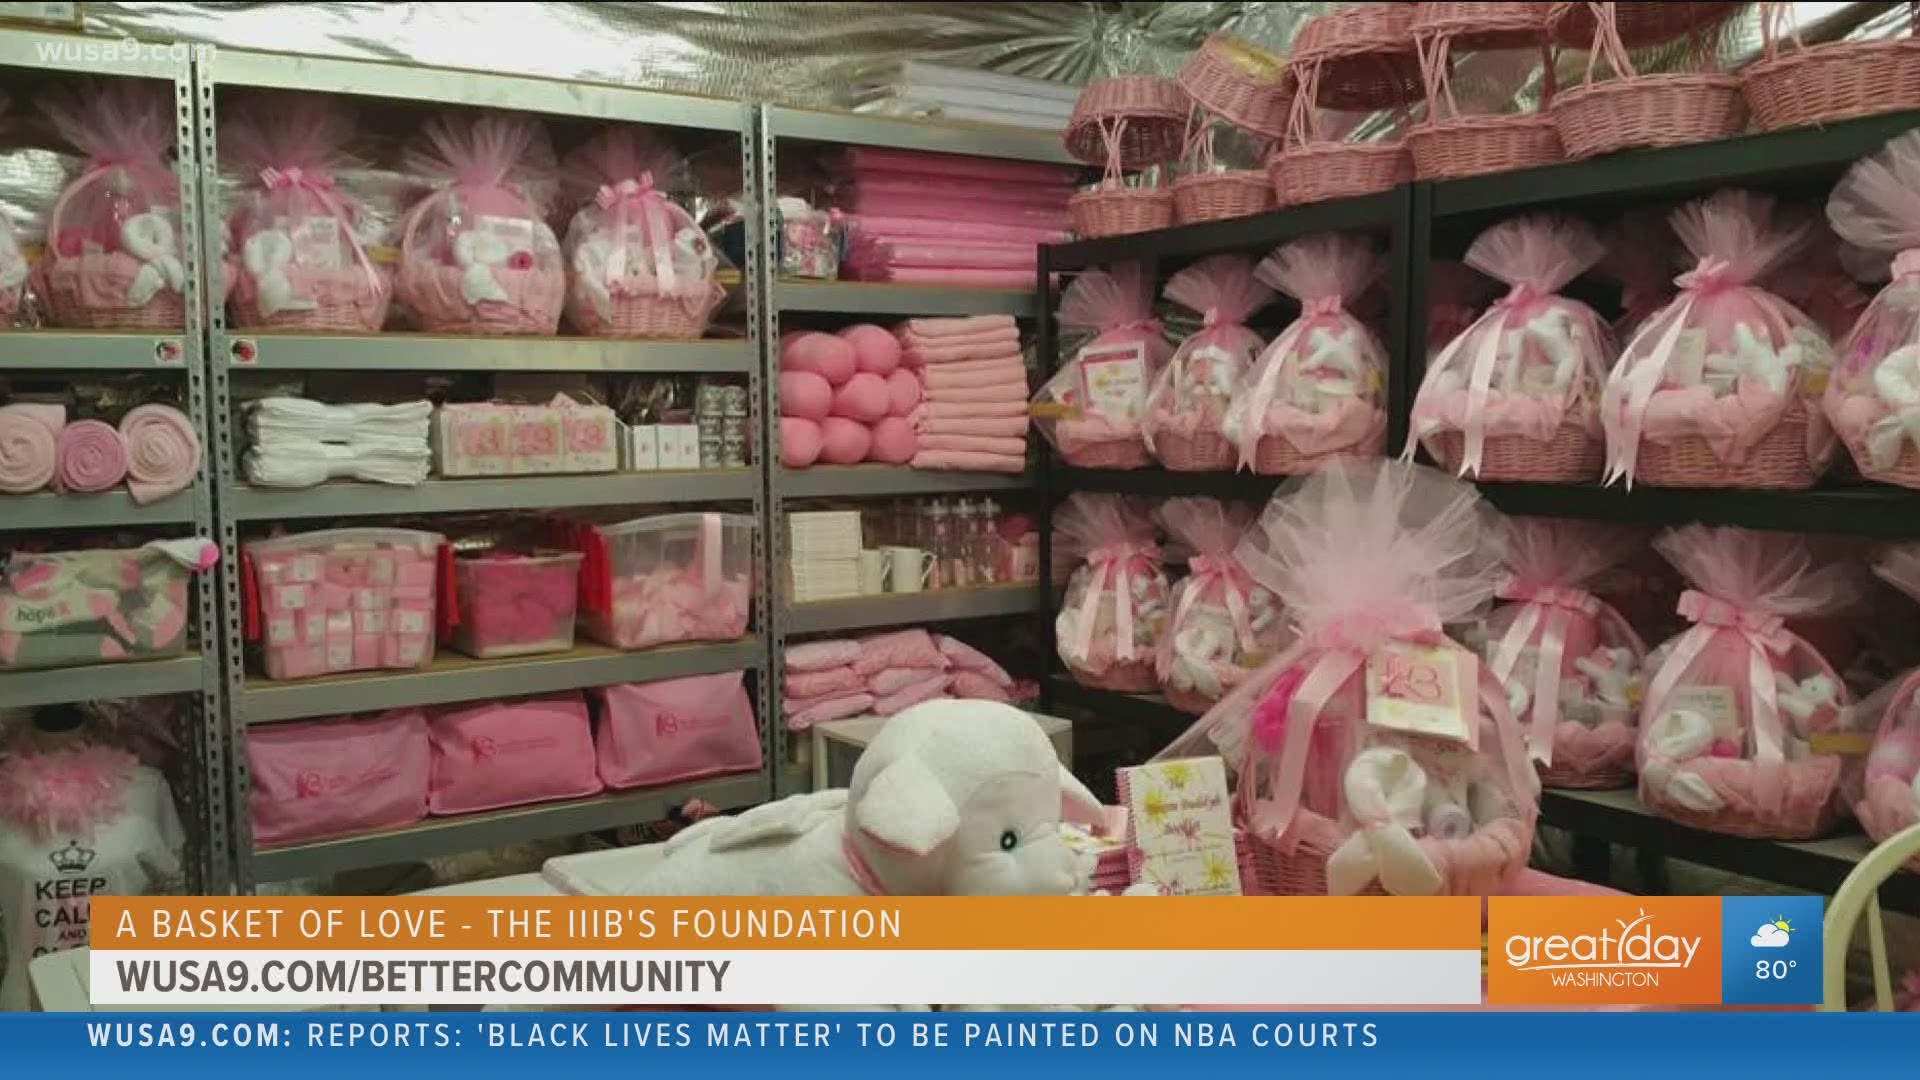 Easterns Automotive Group supports breast cancer organization to give baskets to people going through treatment. Segment is sponsored by Easterns Automotive Group.